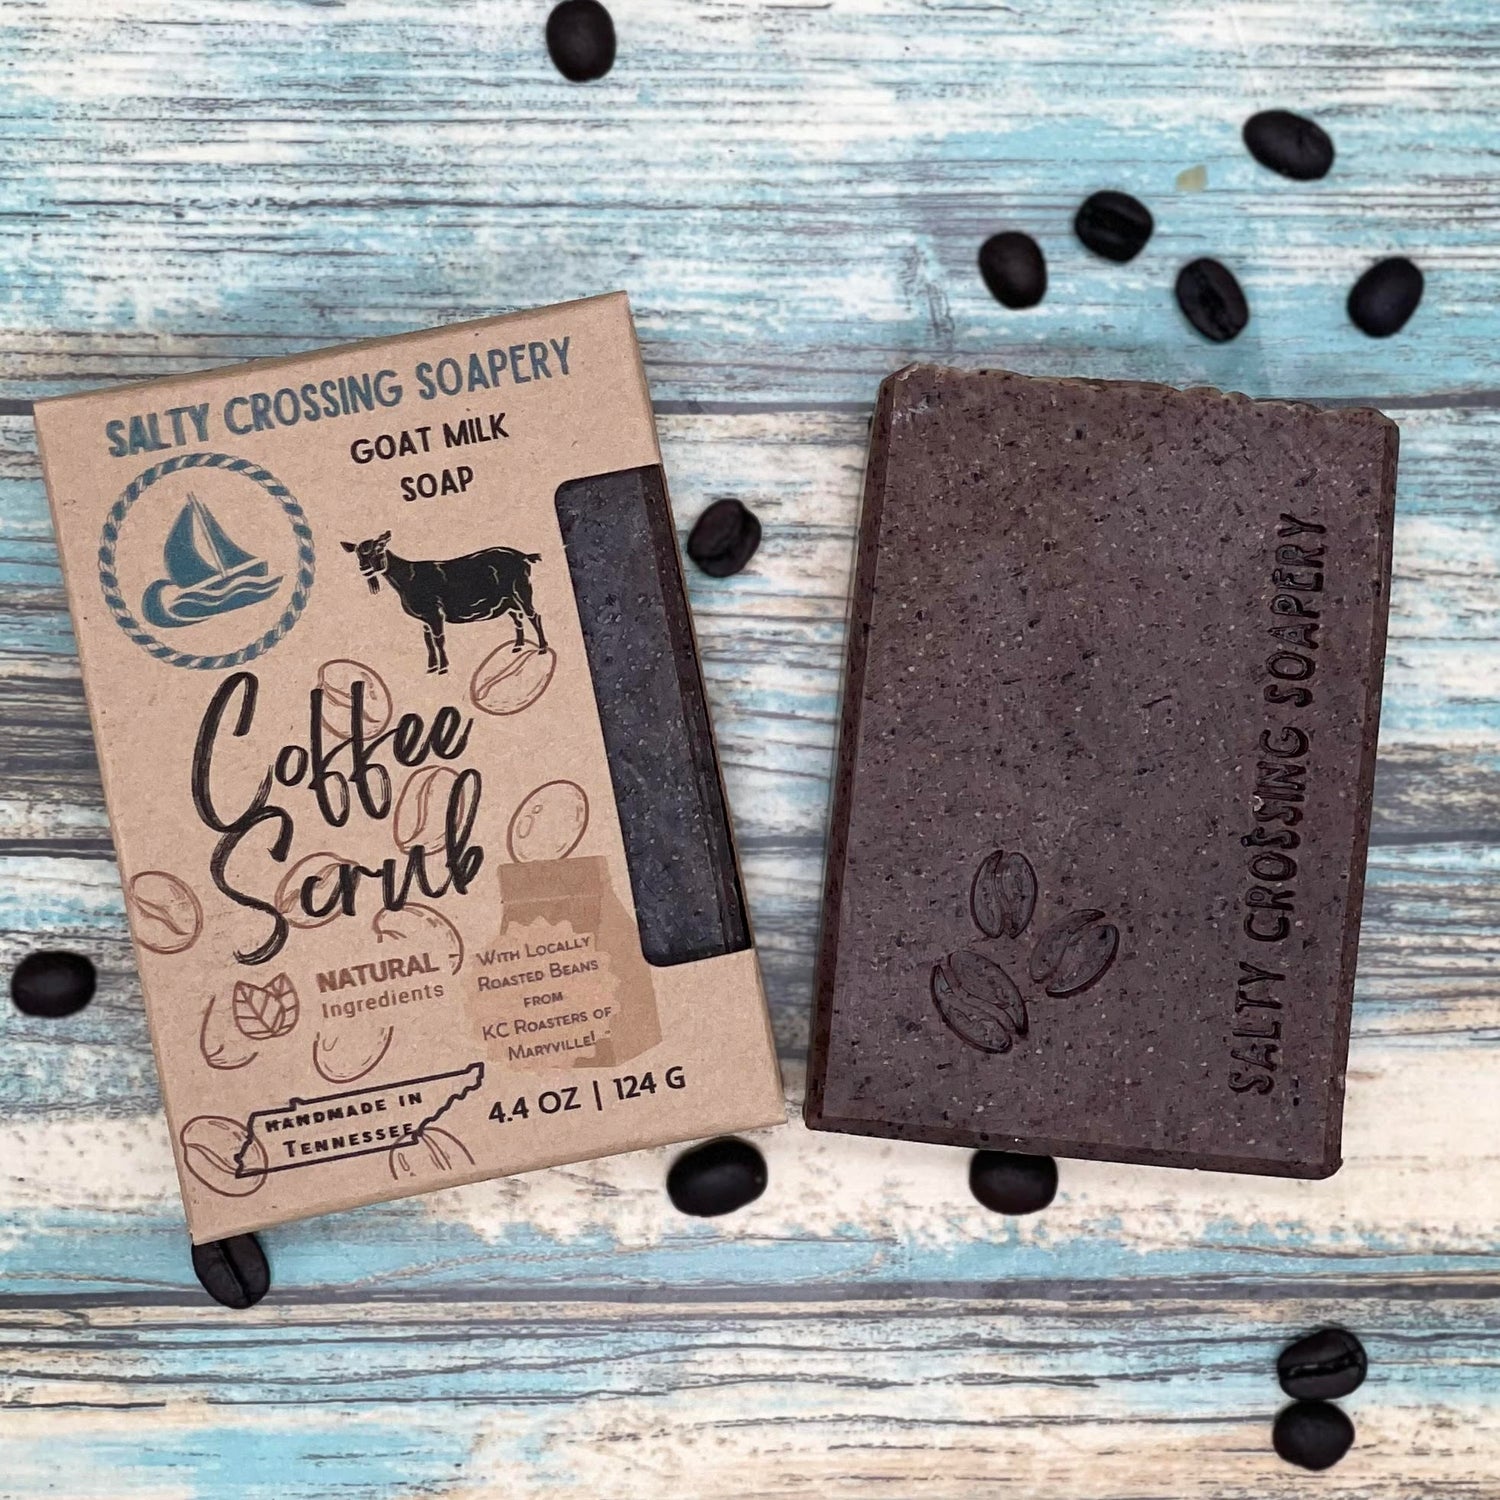 Coffee scrub goat milk soap with box. Dark brown bar stamped with coffee bean graphic and salty crossing Soapery text